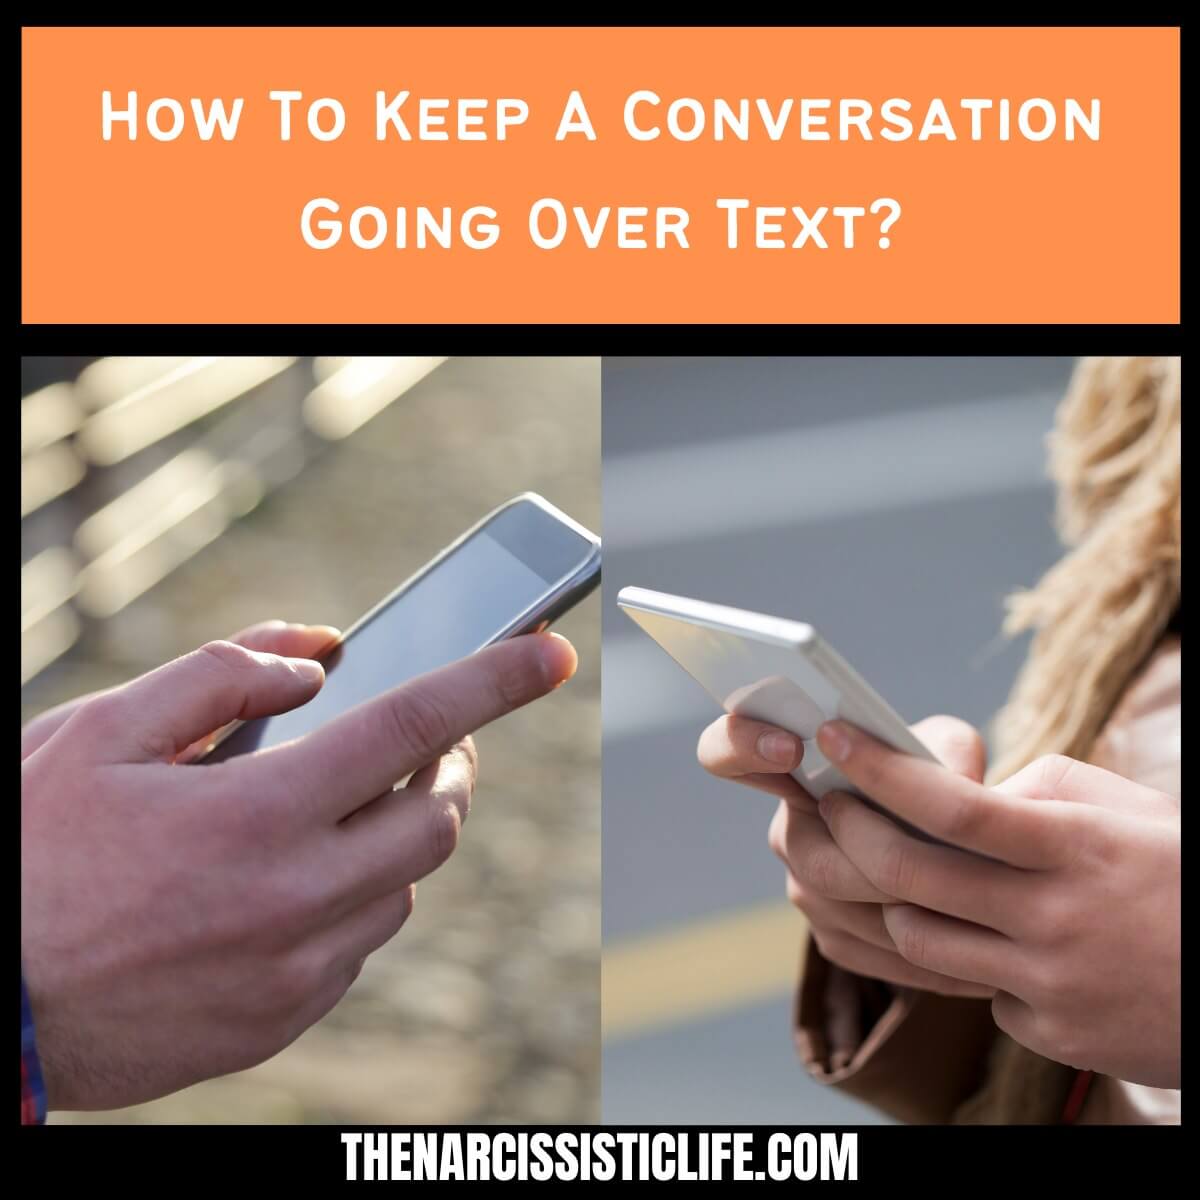 How To Keep A Conversation Going Over Text??